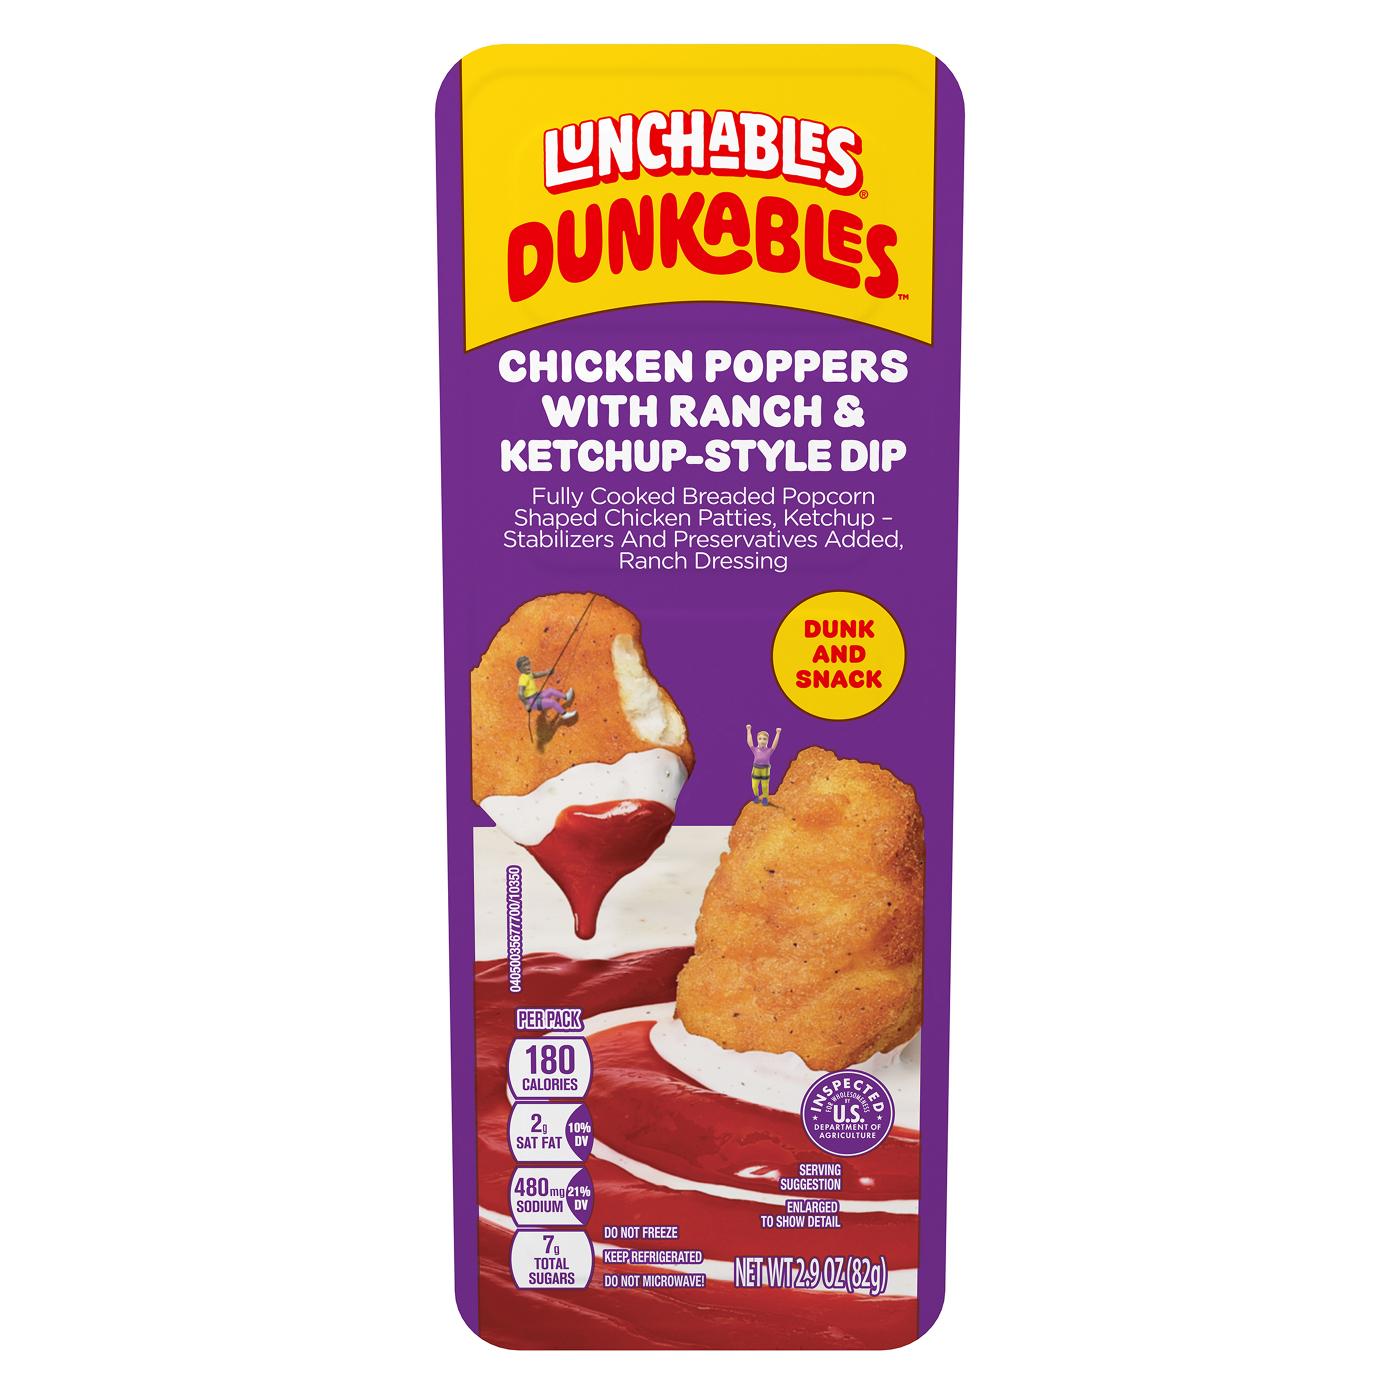 Lunchables Dunkables Snack Kit Tray - Chicken Poppers with Ranch & Ketchup; image 1 of 8